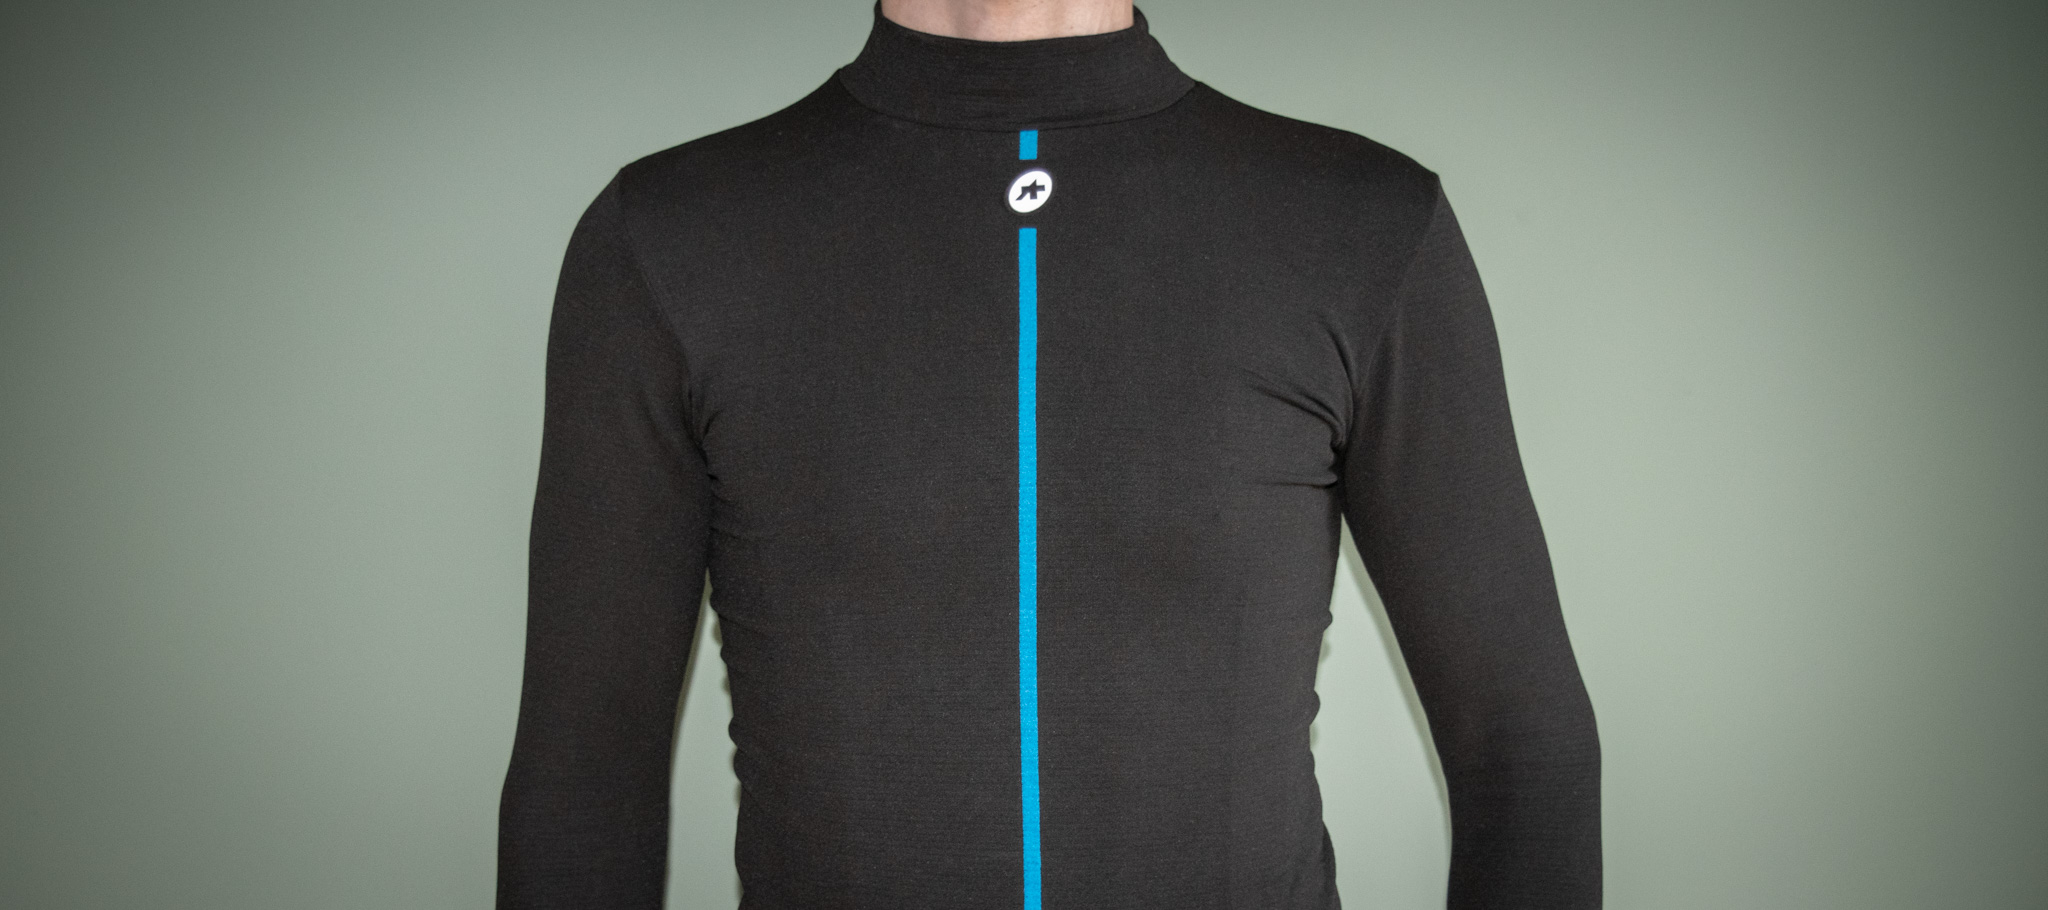 Review: Solo Merino short sleeve base layer